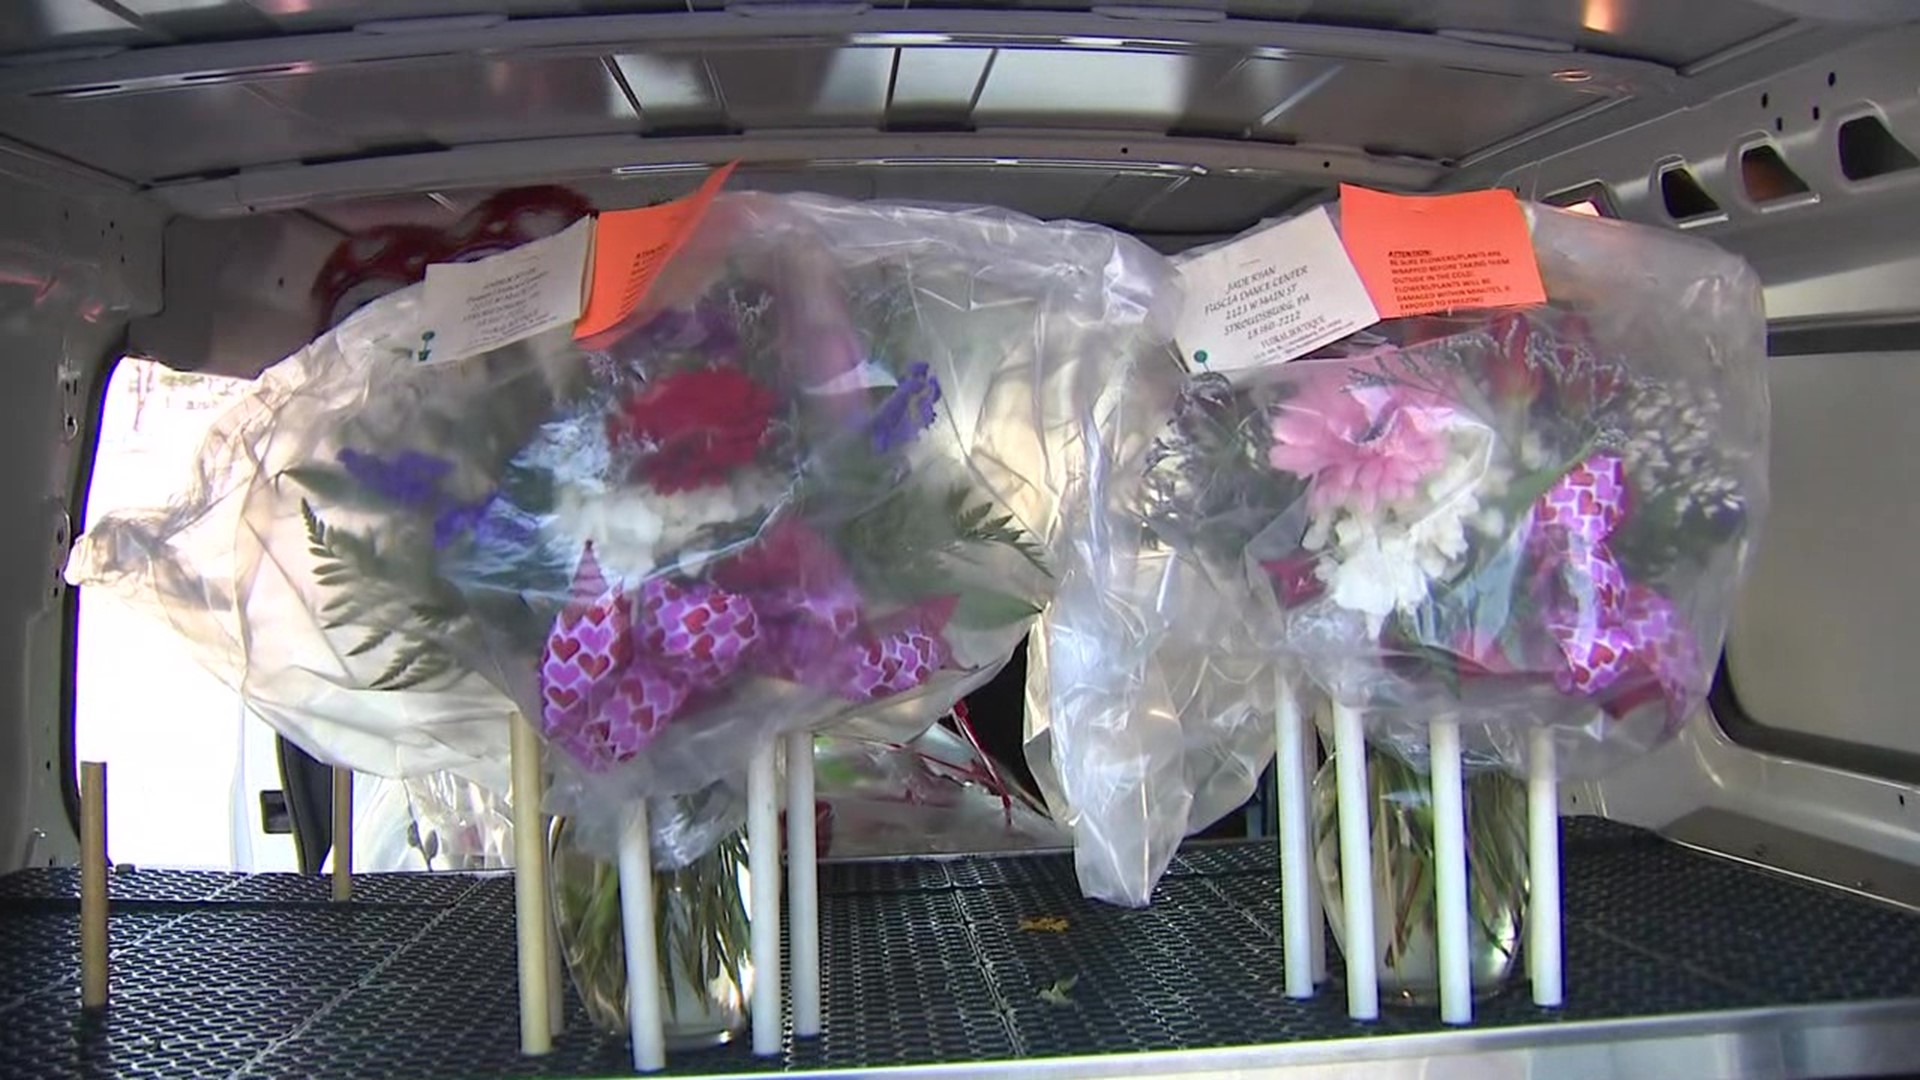 One of the busiest days of the year for florists came with some extra challenges this year.